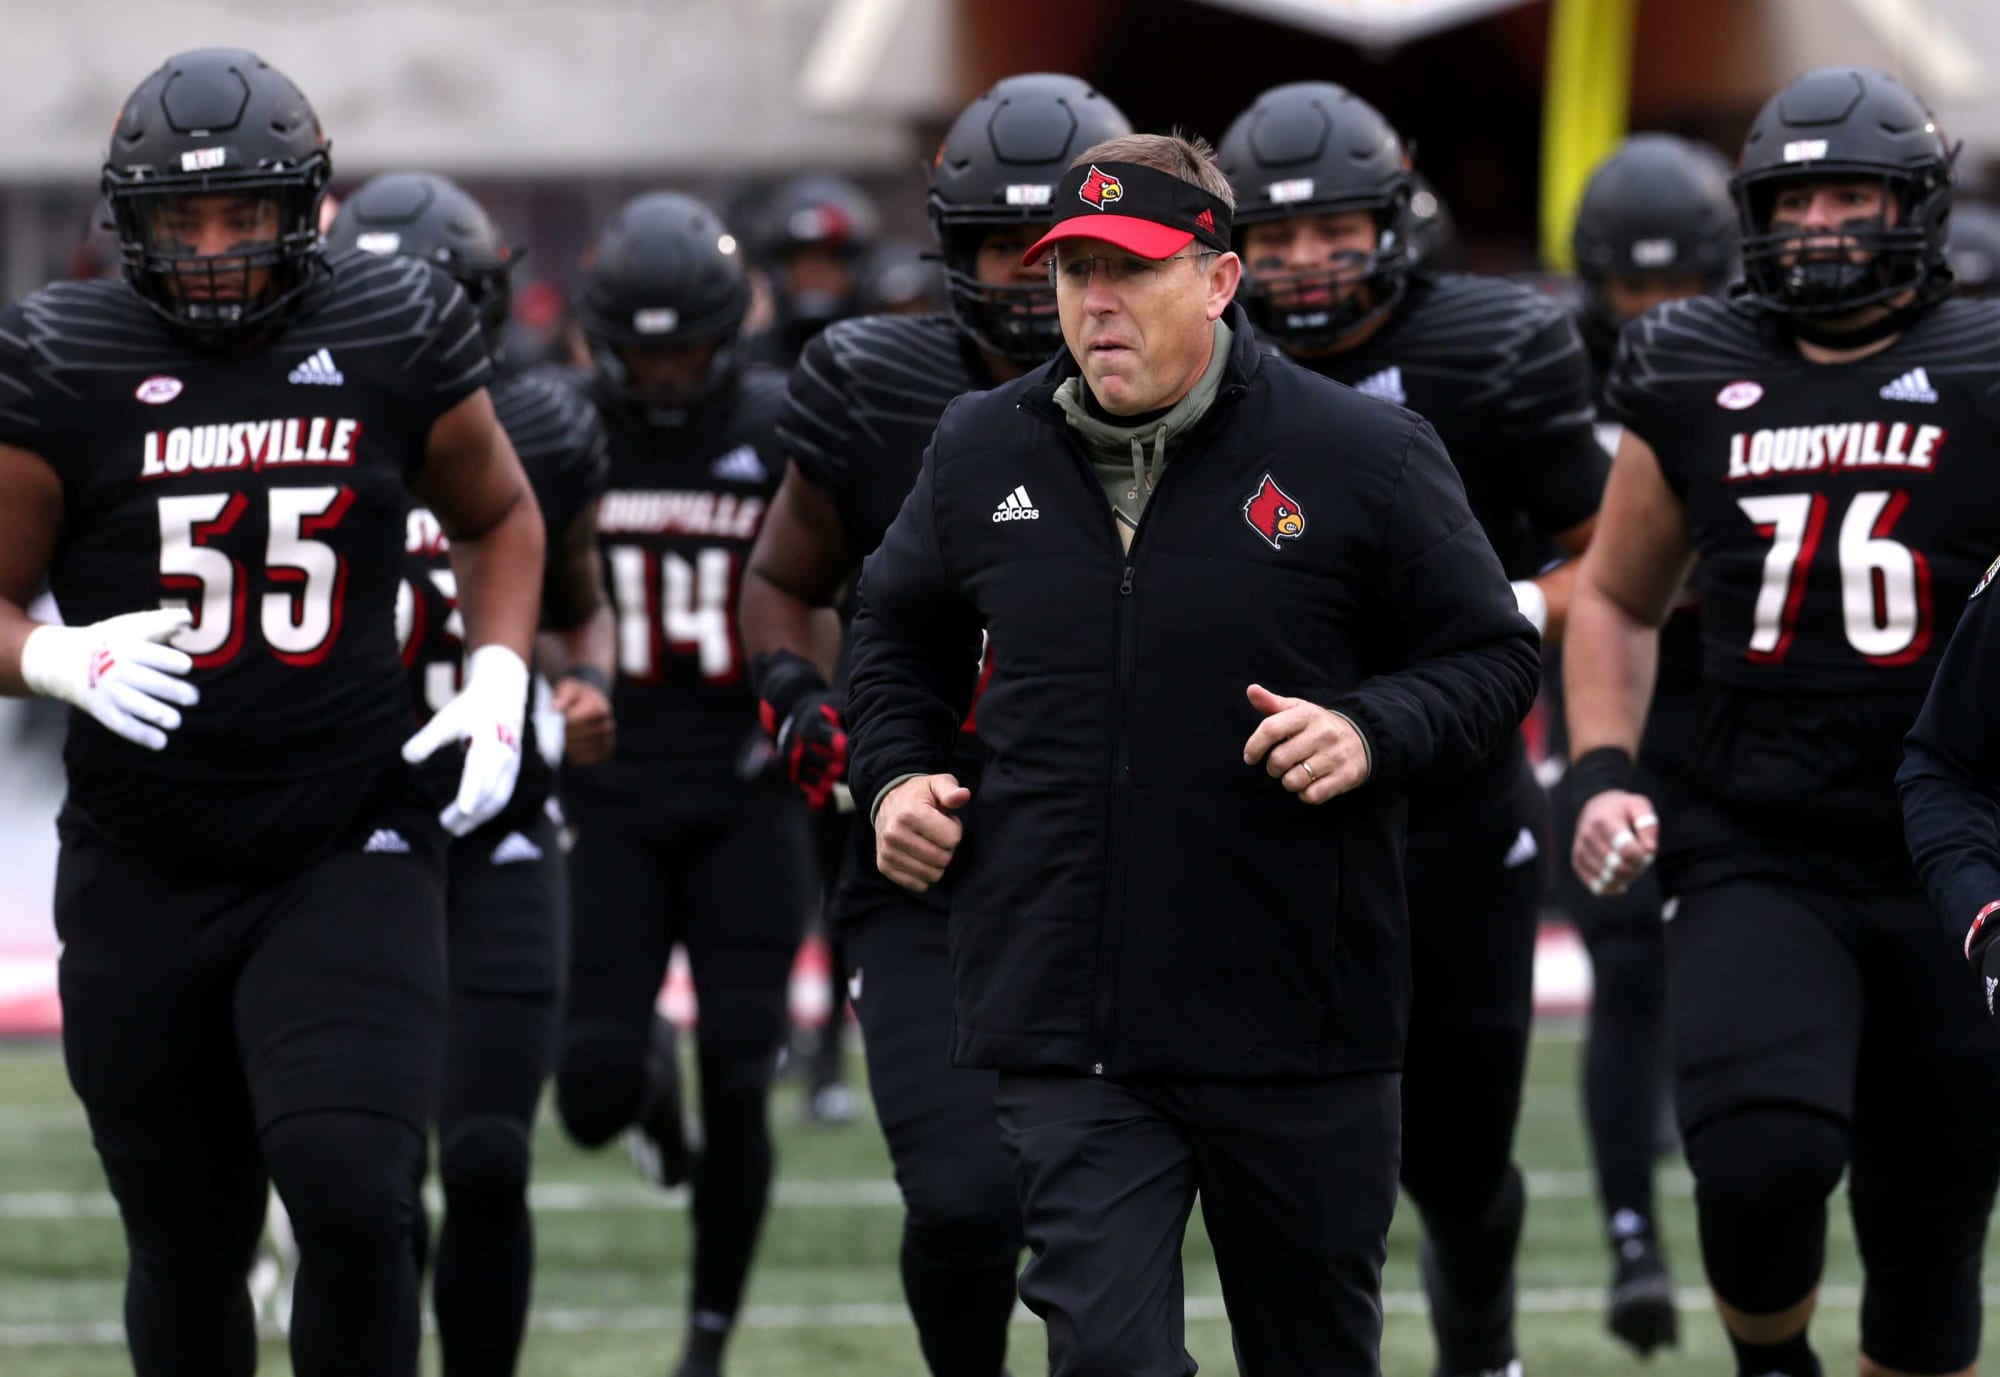 Louisville Football continues incredible recruiting run with 5-star RB